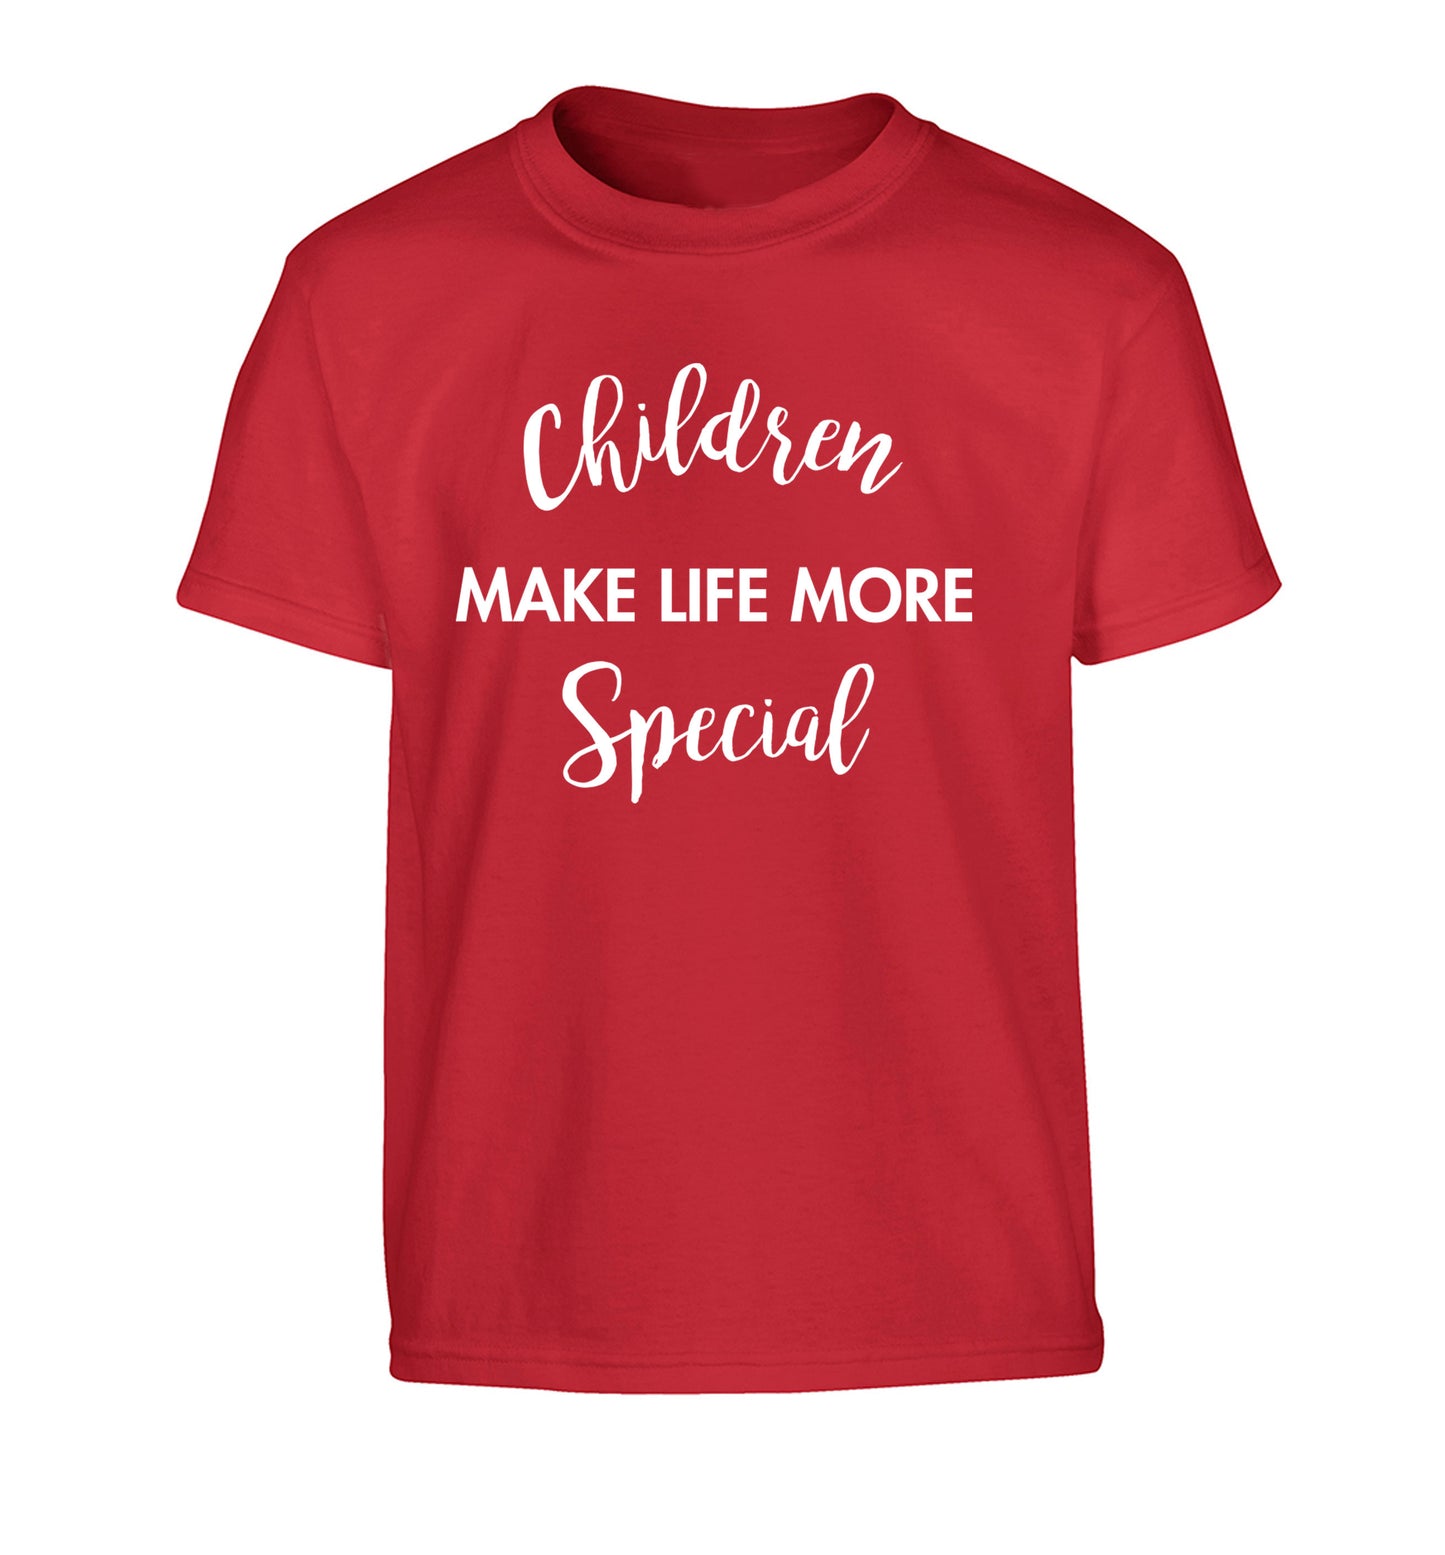 Children make life more special Children's red Tshirt 12-14 Years